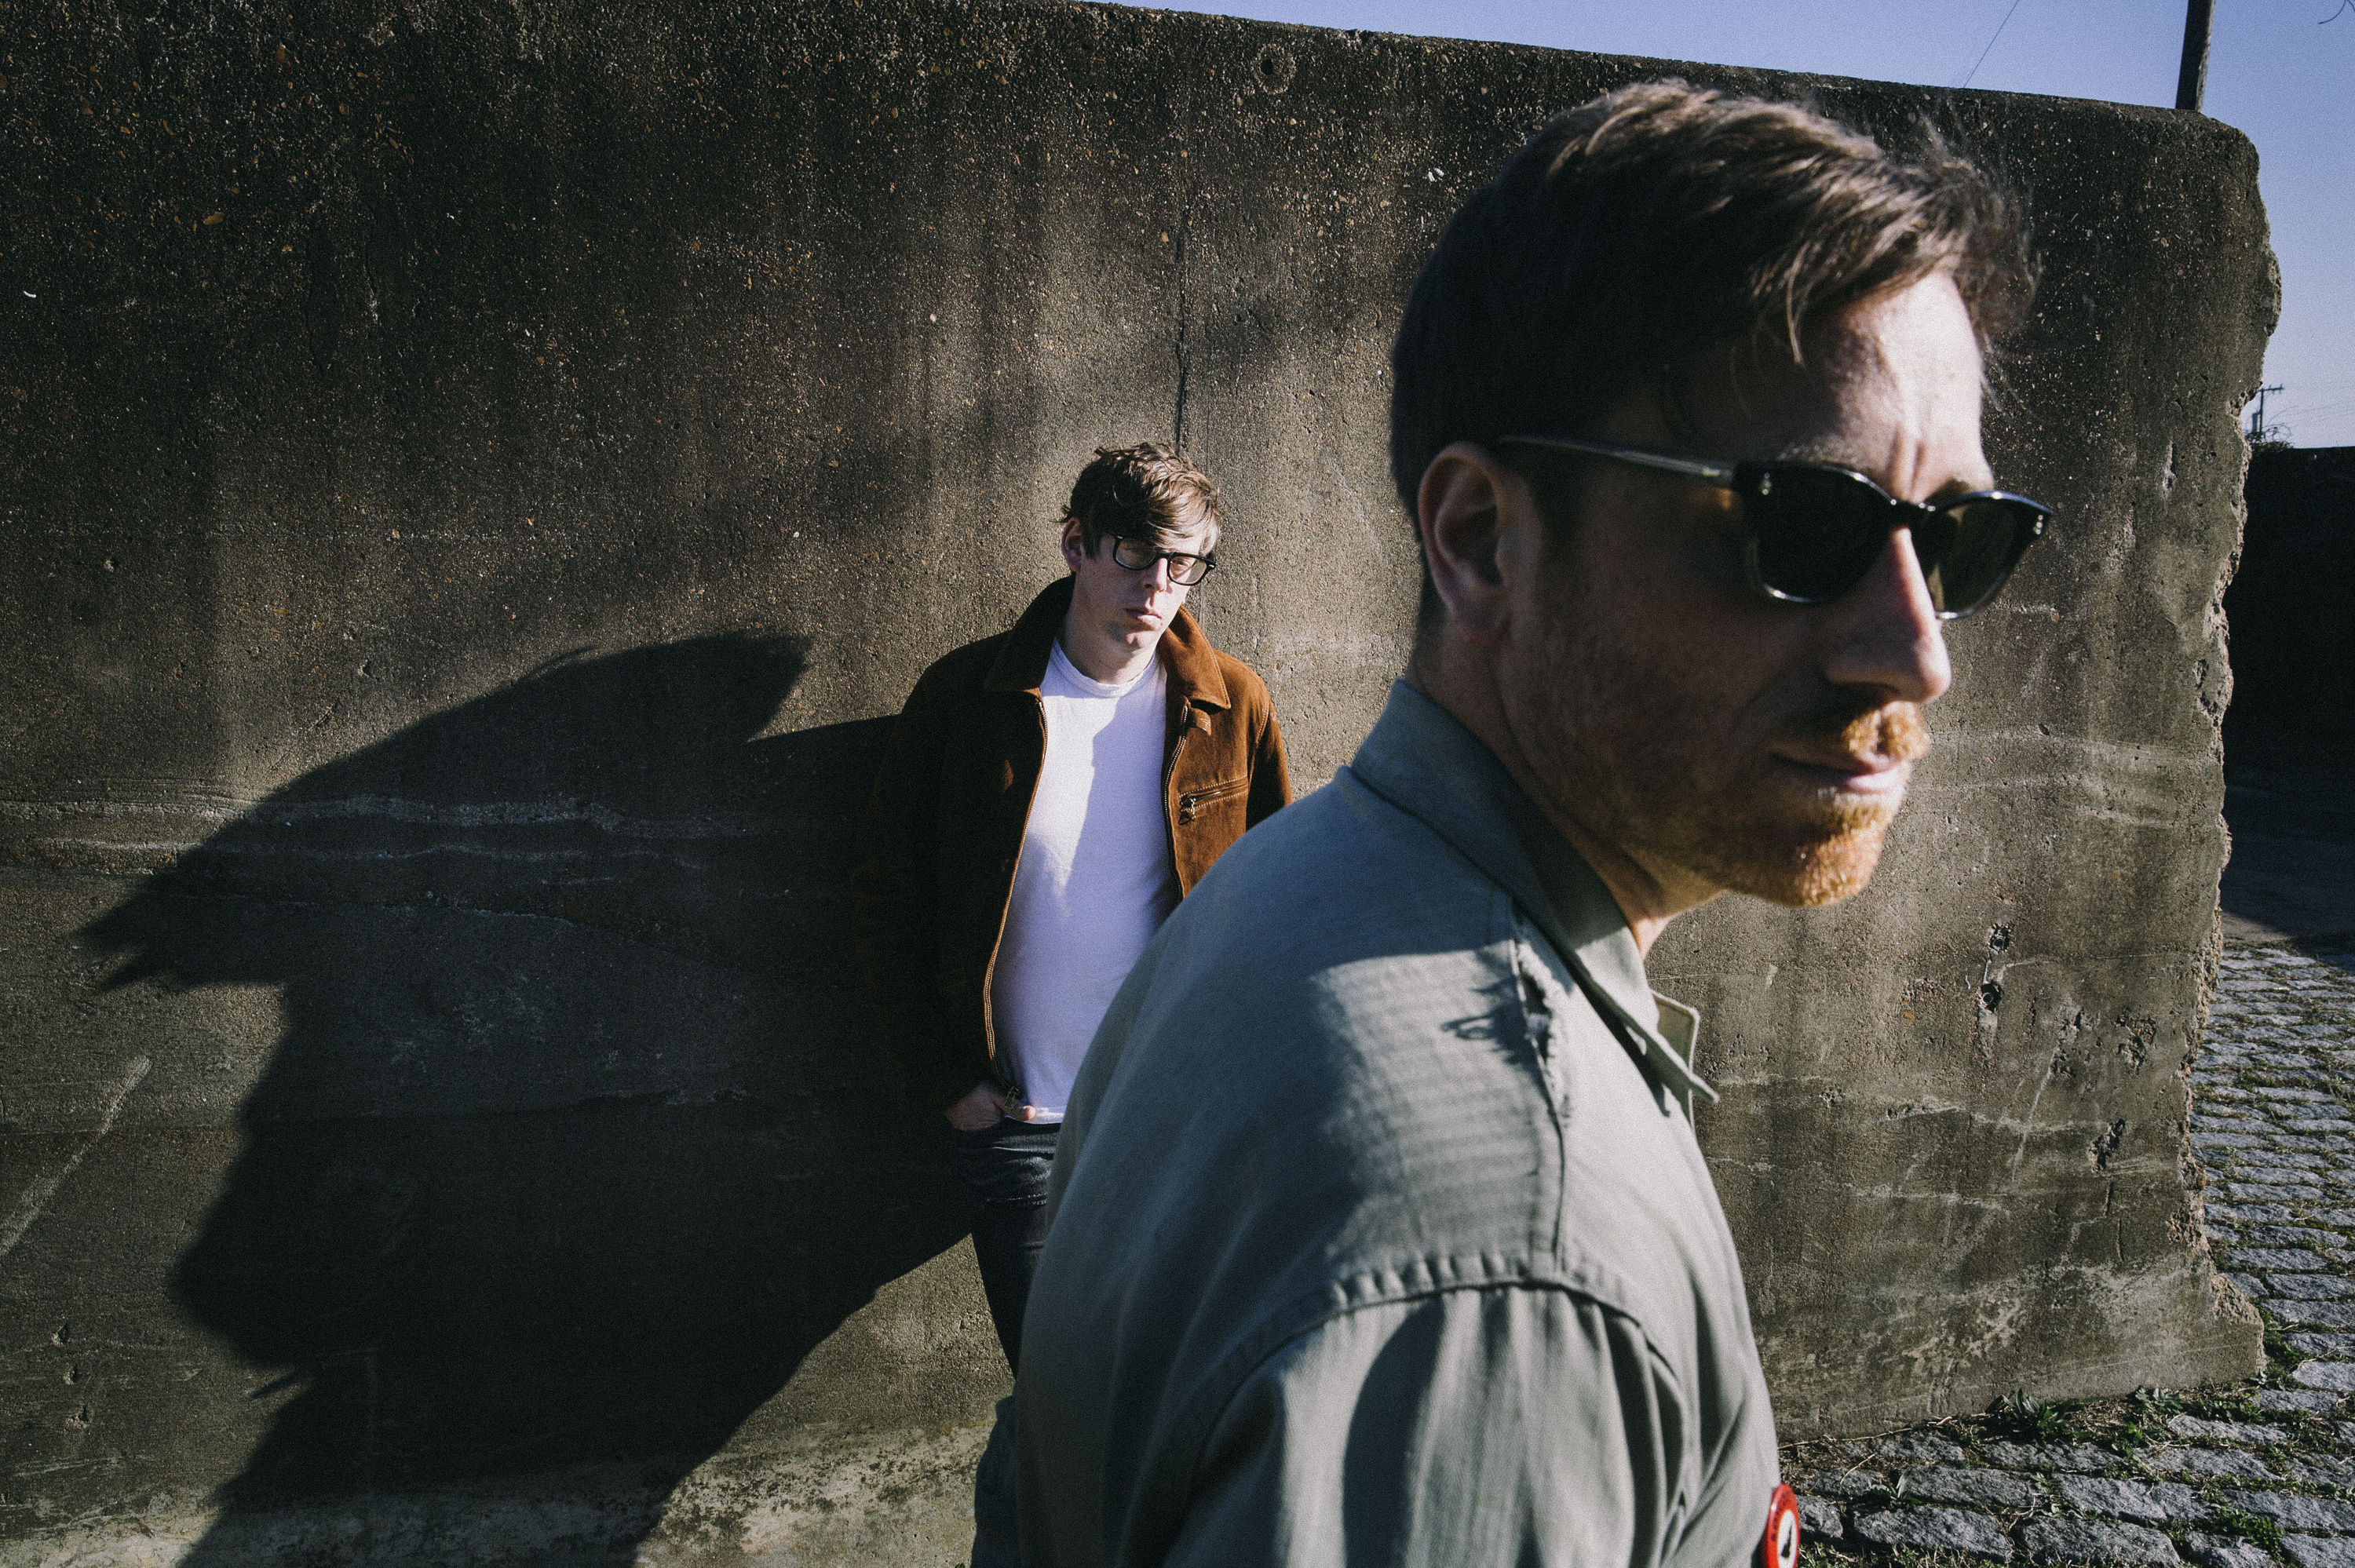 20+ The Black Keys HD Wallpapers and Backgrounds 3000x2000